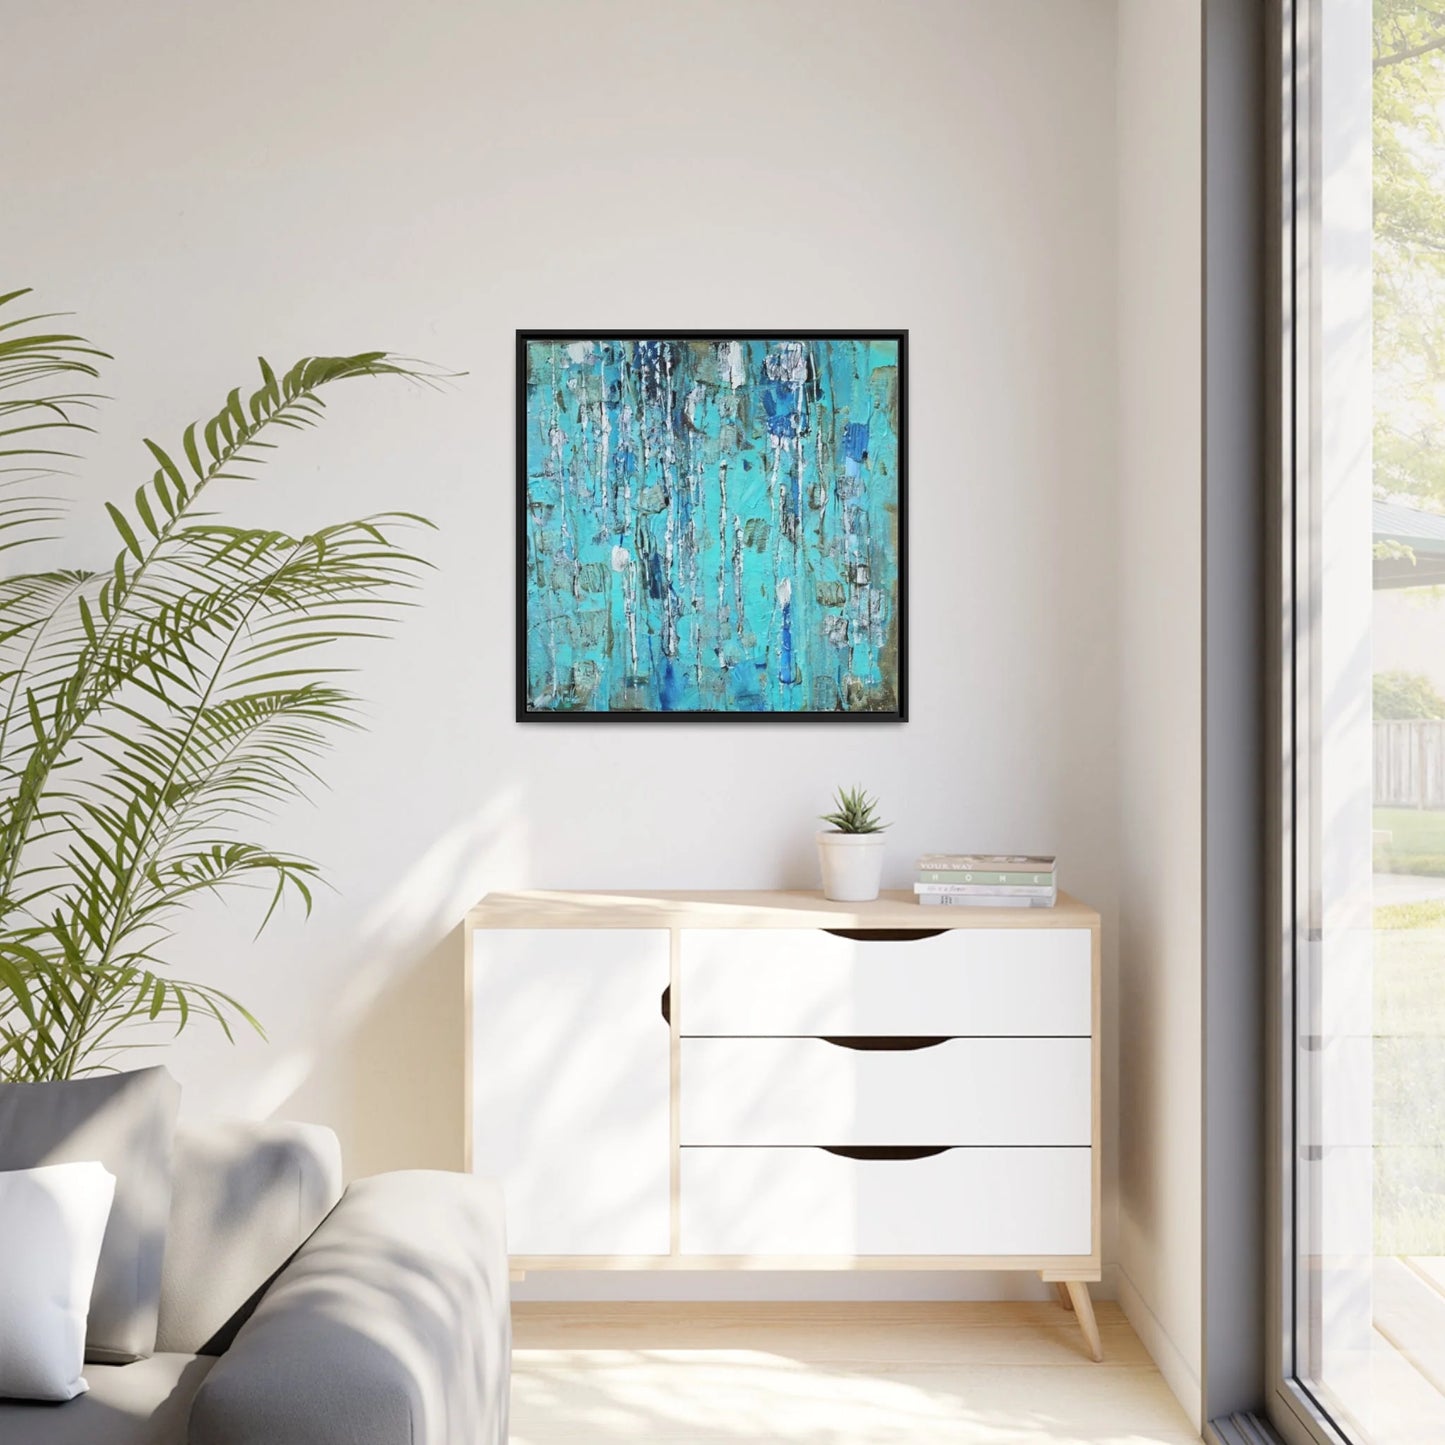 "Premium Canvas Wall Art with Frame and Eco-Friendly AQUA - by Queennoble"